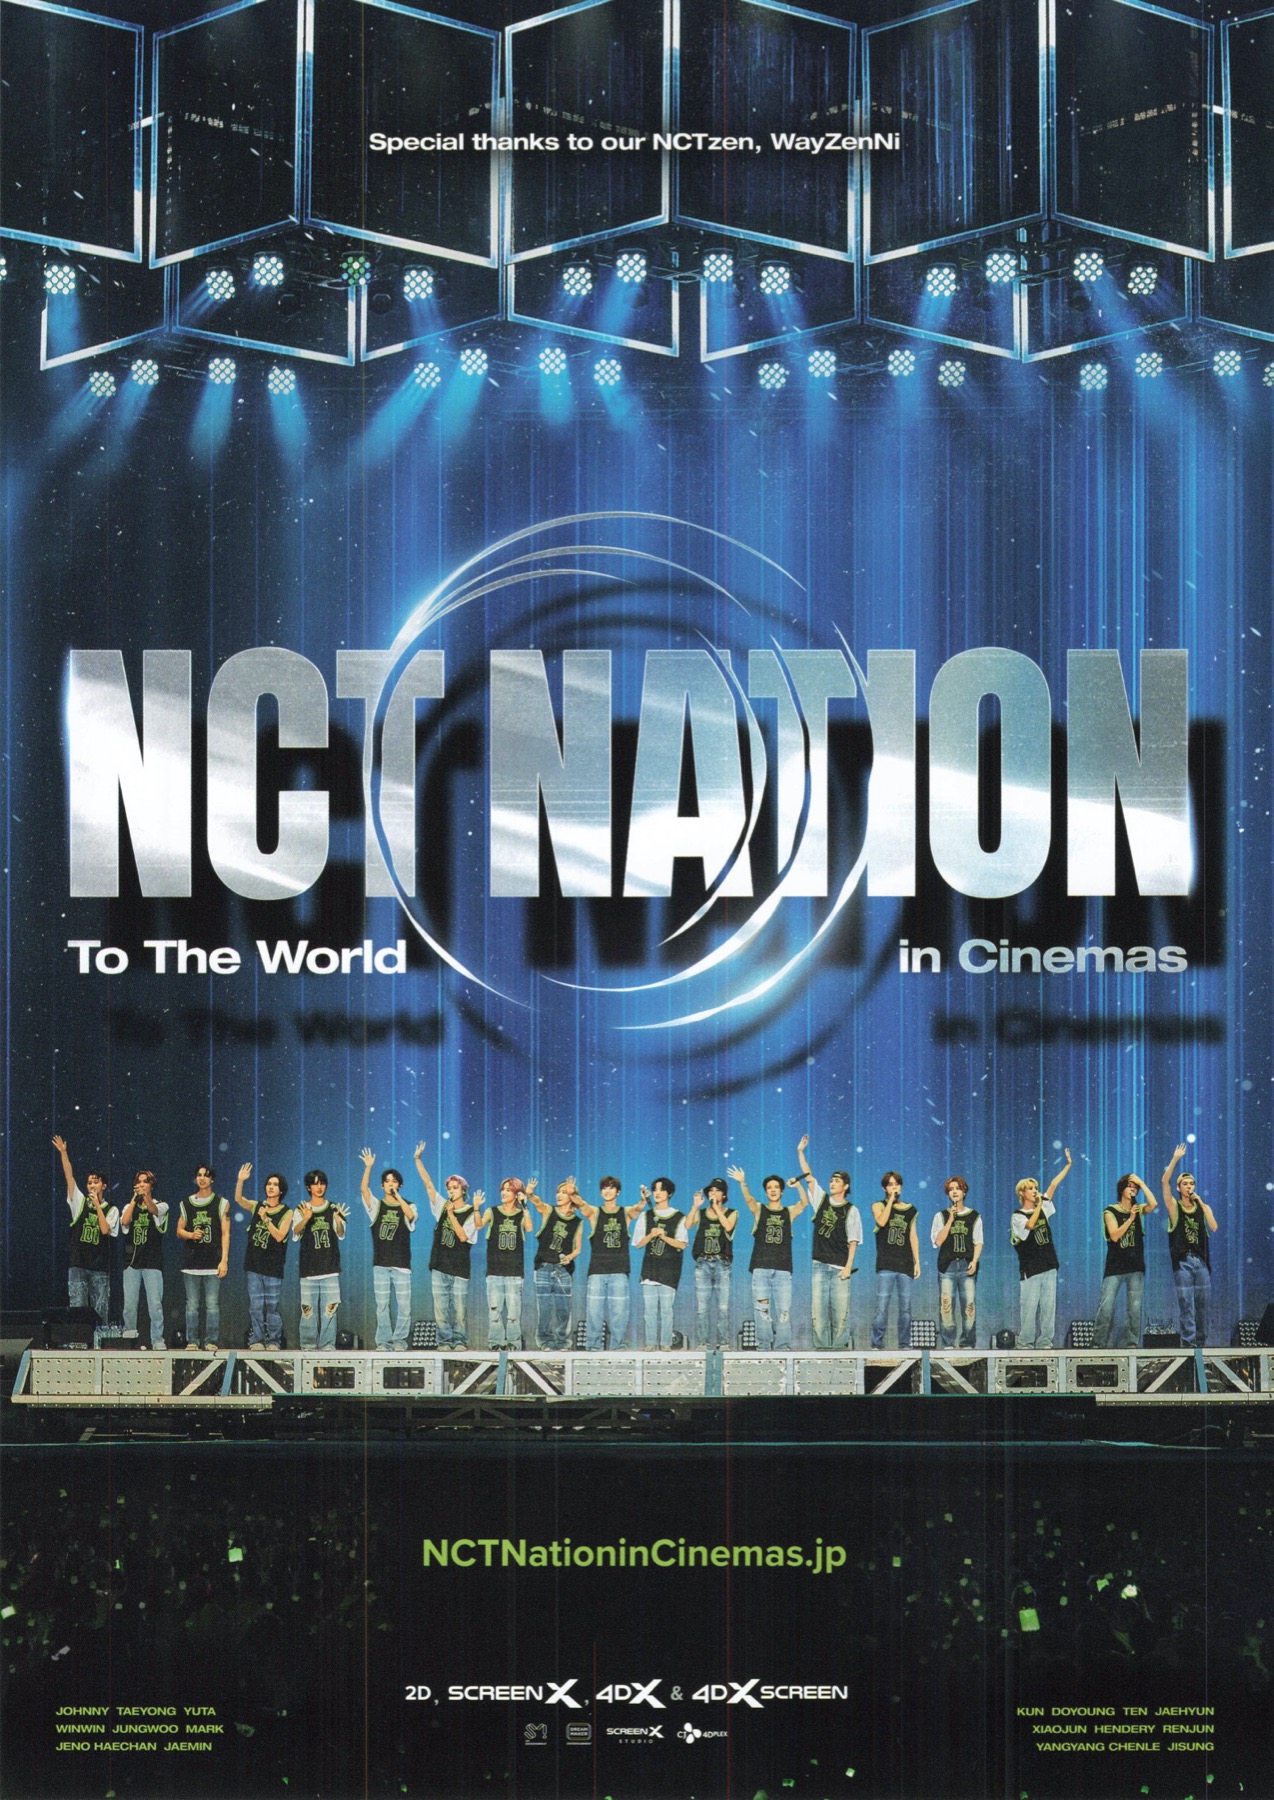 NCT NATION To The World in Cinemas